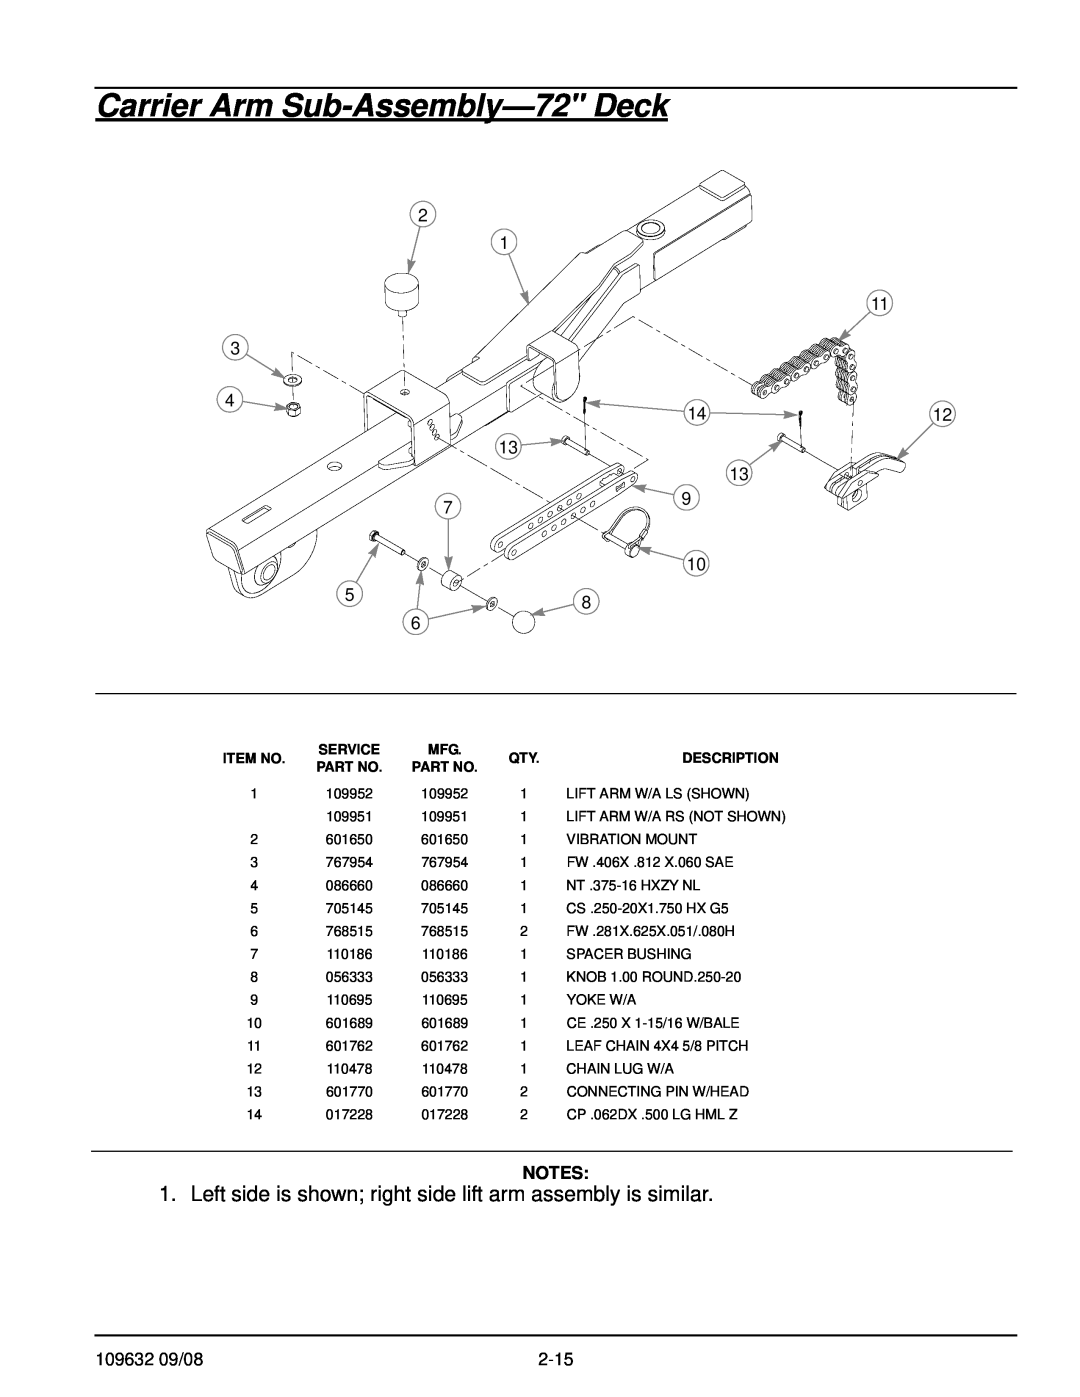 Hustler Turf 928721 Carrier Arm Sub-Assembly-72 Deck, Left side is shown right side lift arm assembly is similar, Item No 